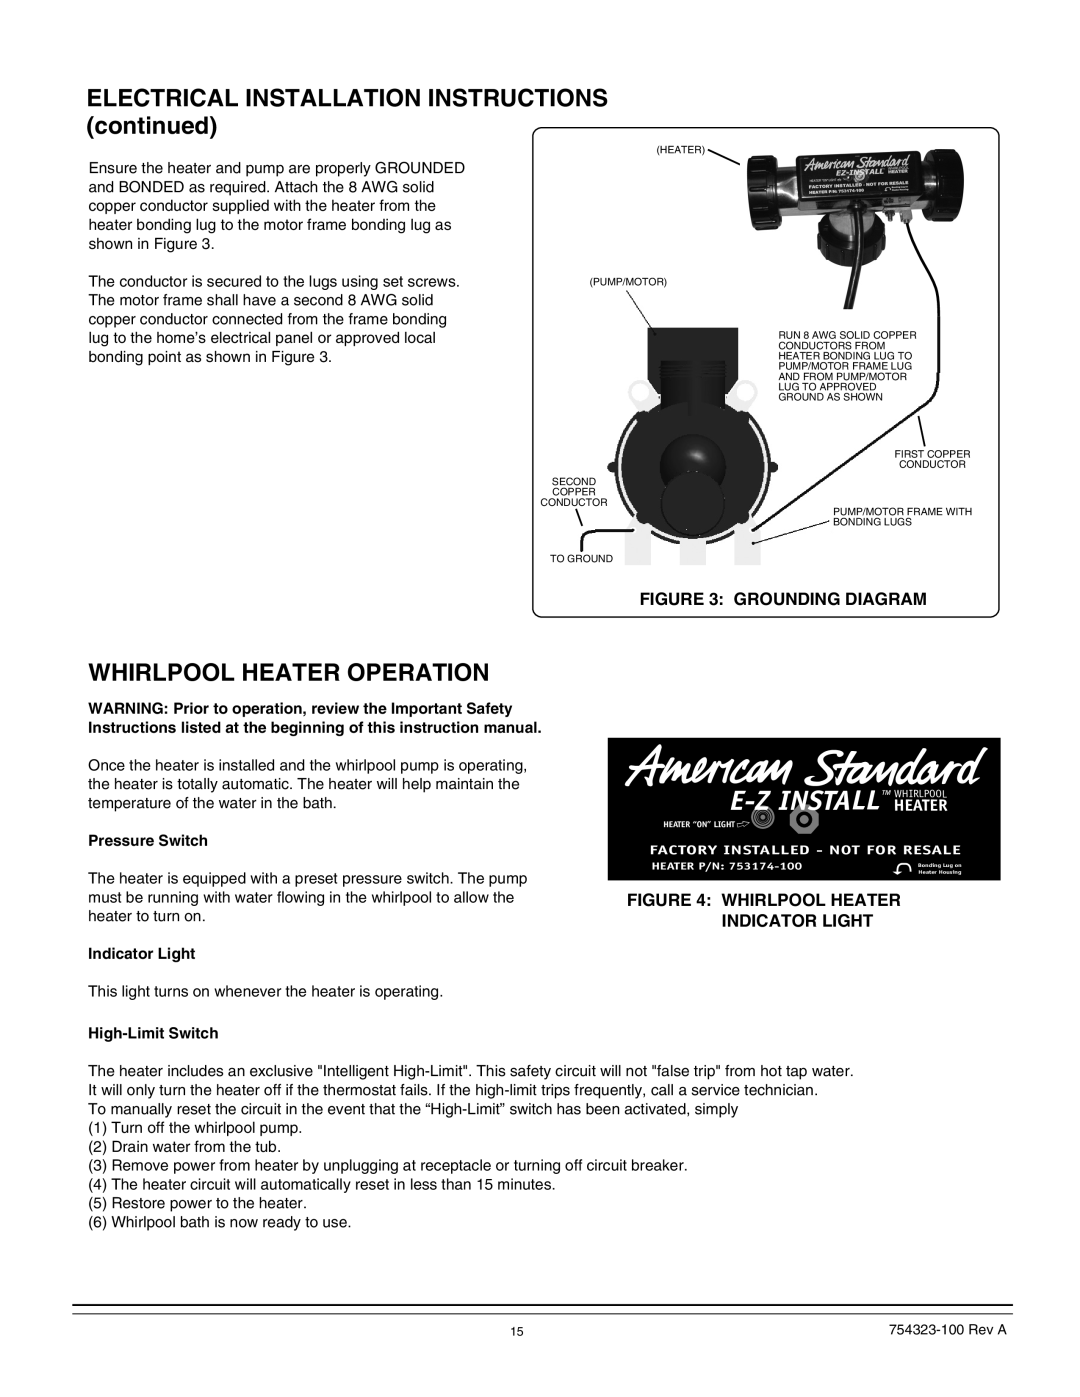 American Standard 754323-100 Rev A E-Zinstall, ELECTRICAL INSTALLATION INSTRUCTIONS continued, Whirlpool Heater Operation 